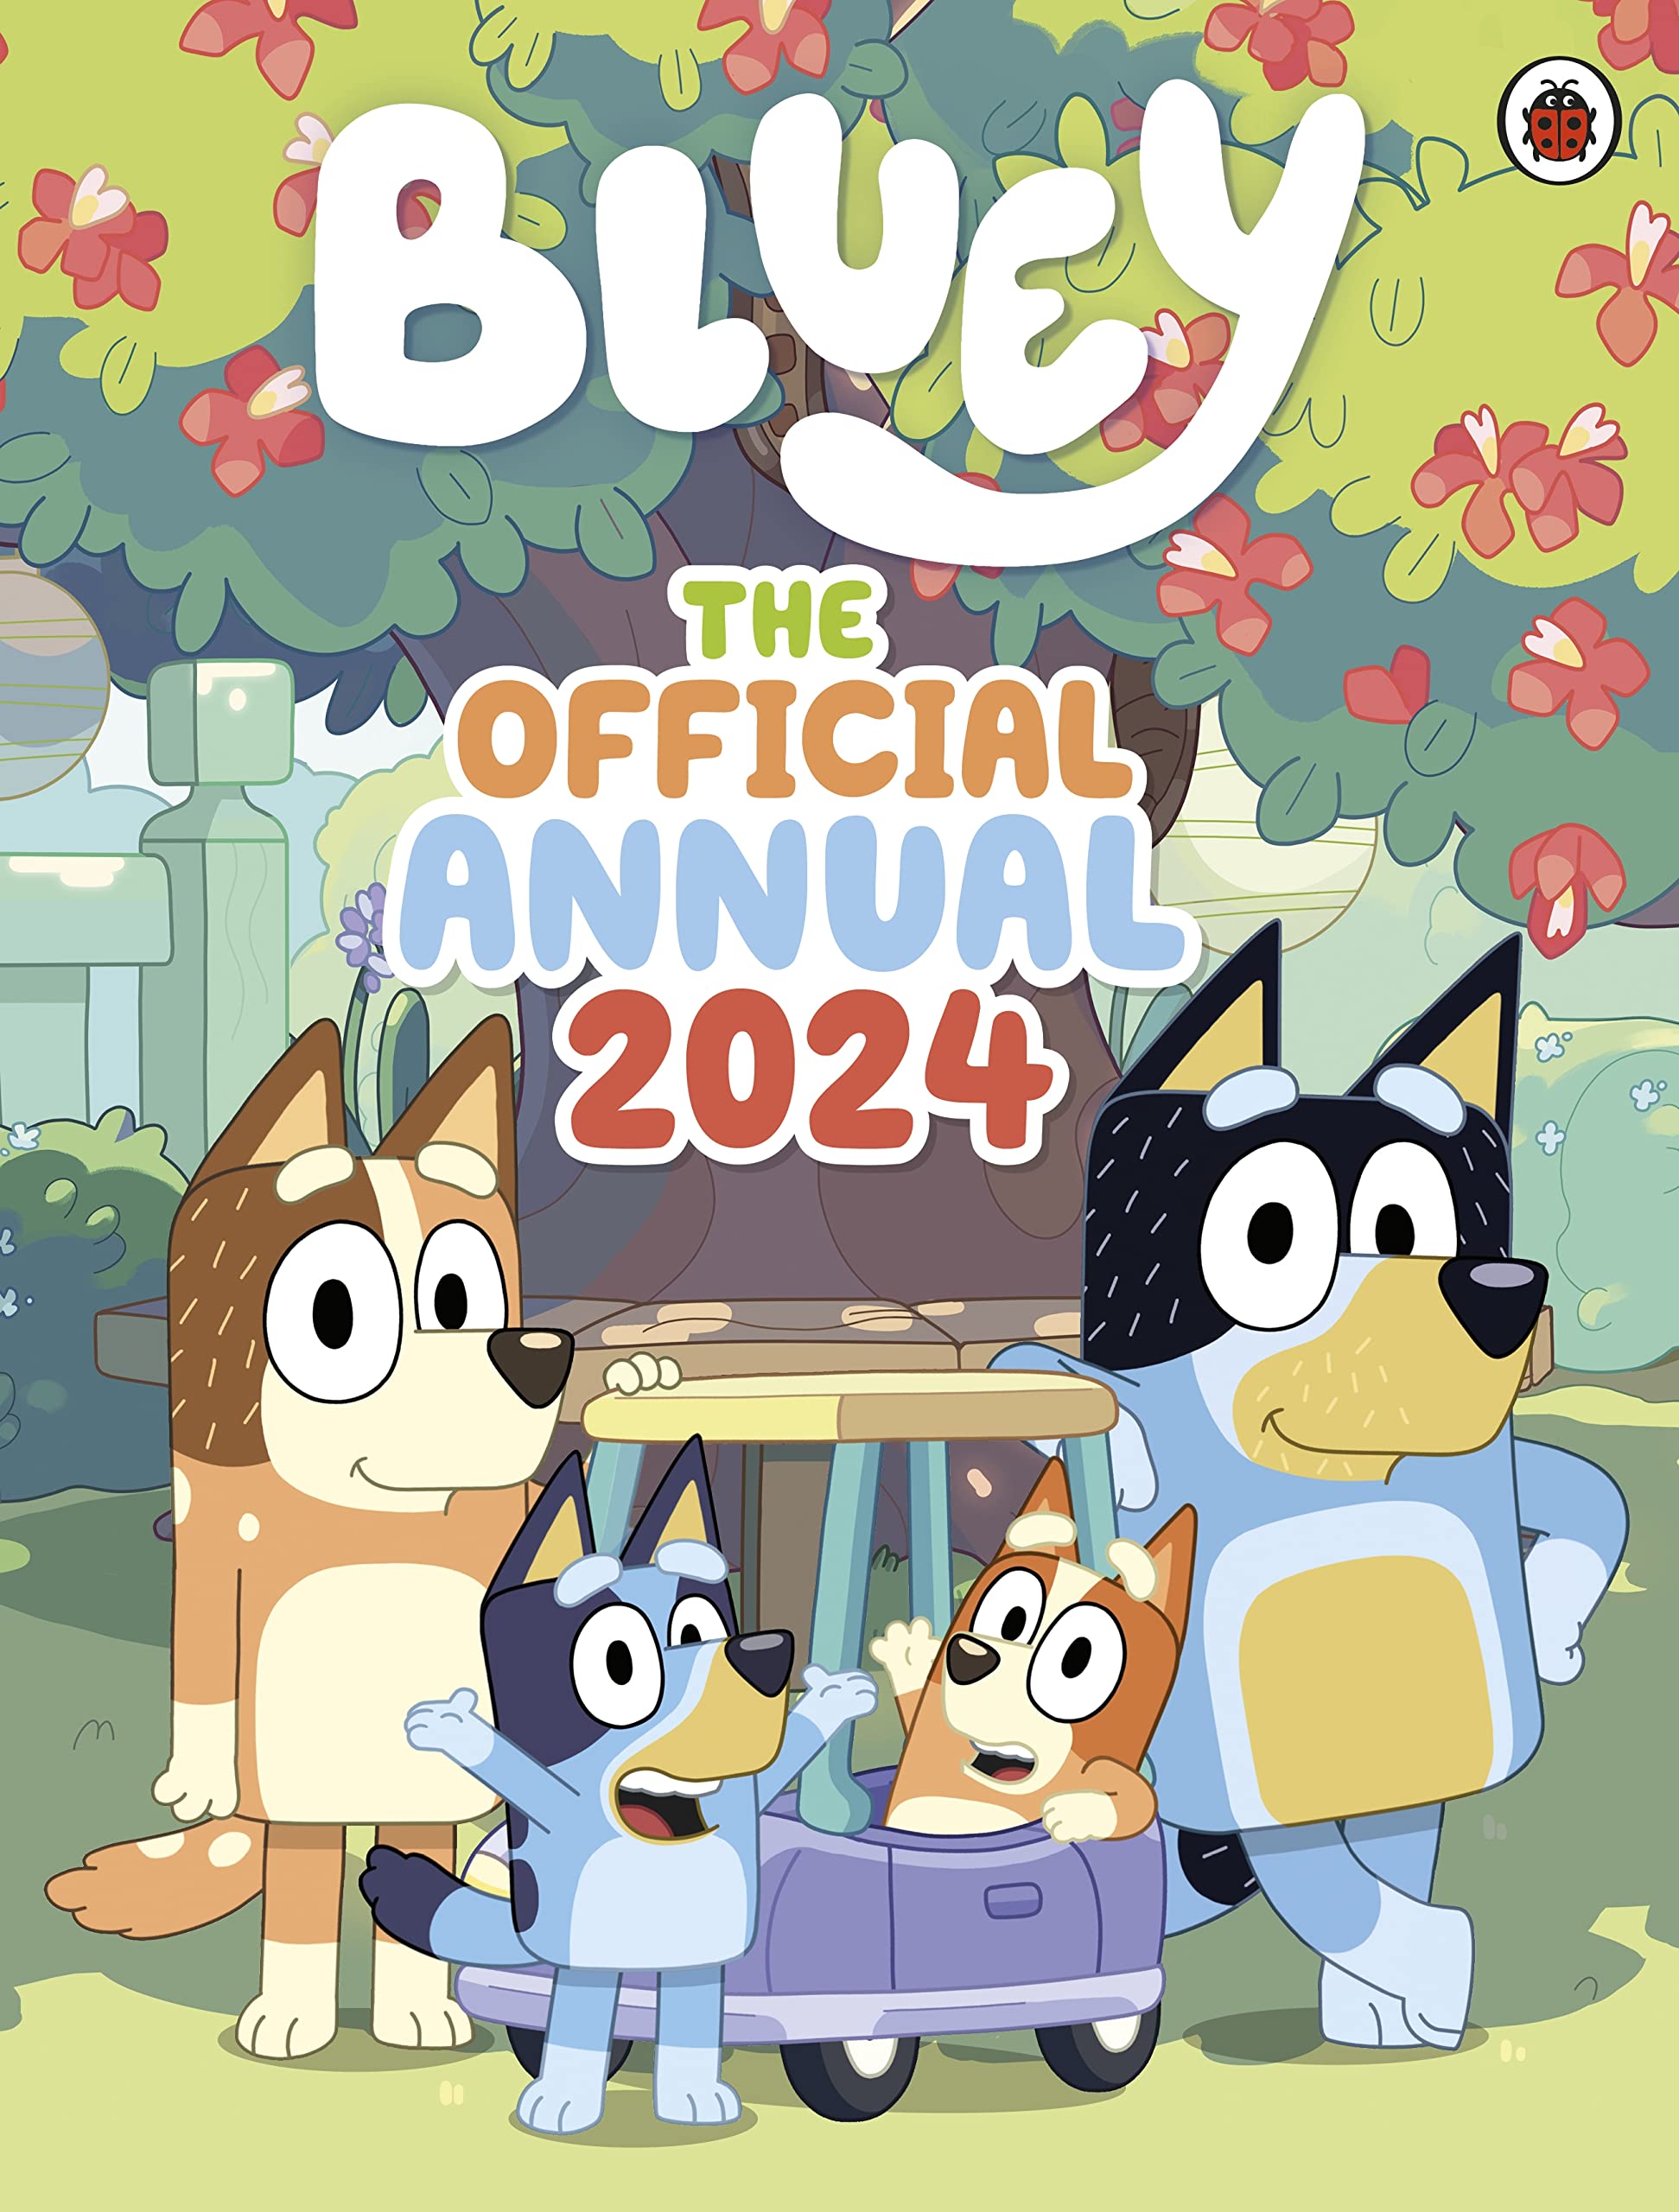 Bluey The Official Bluey Annual 2024